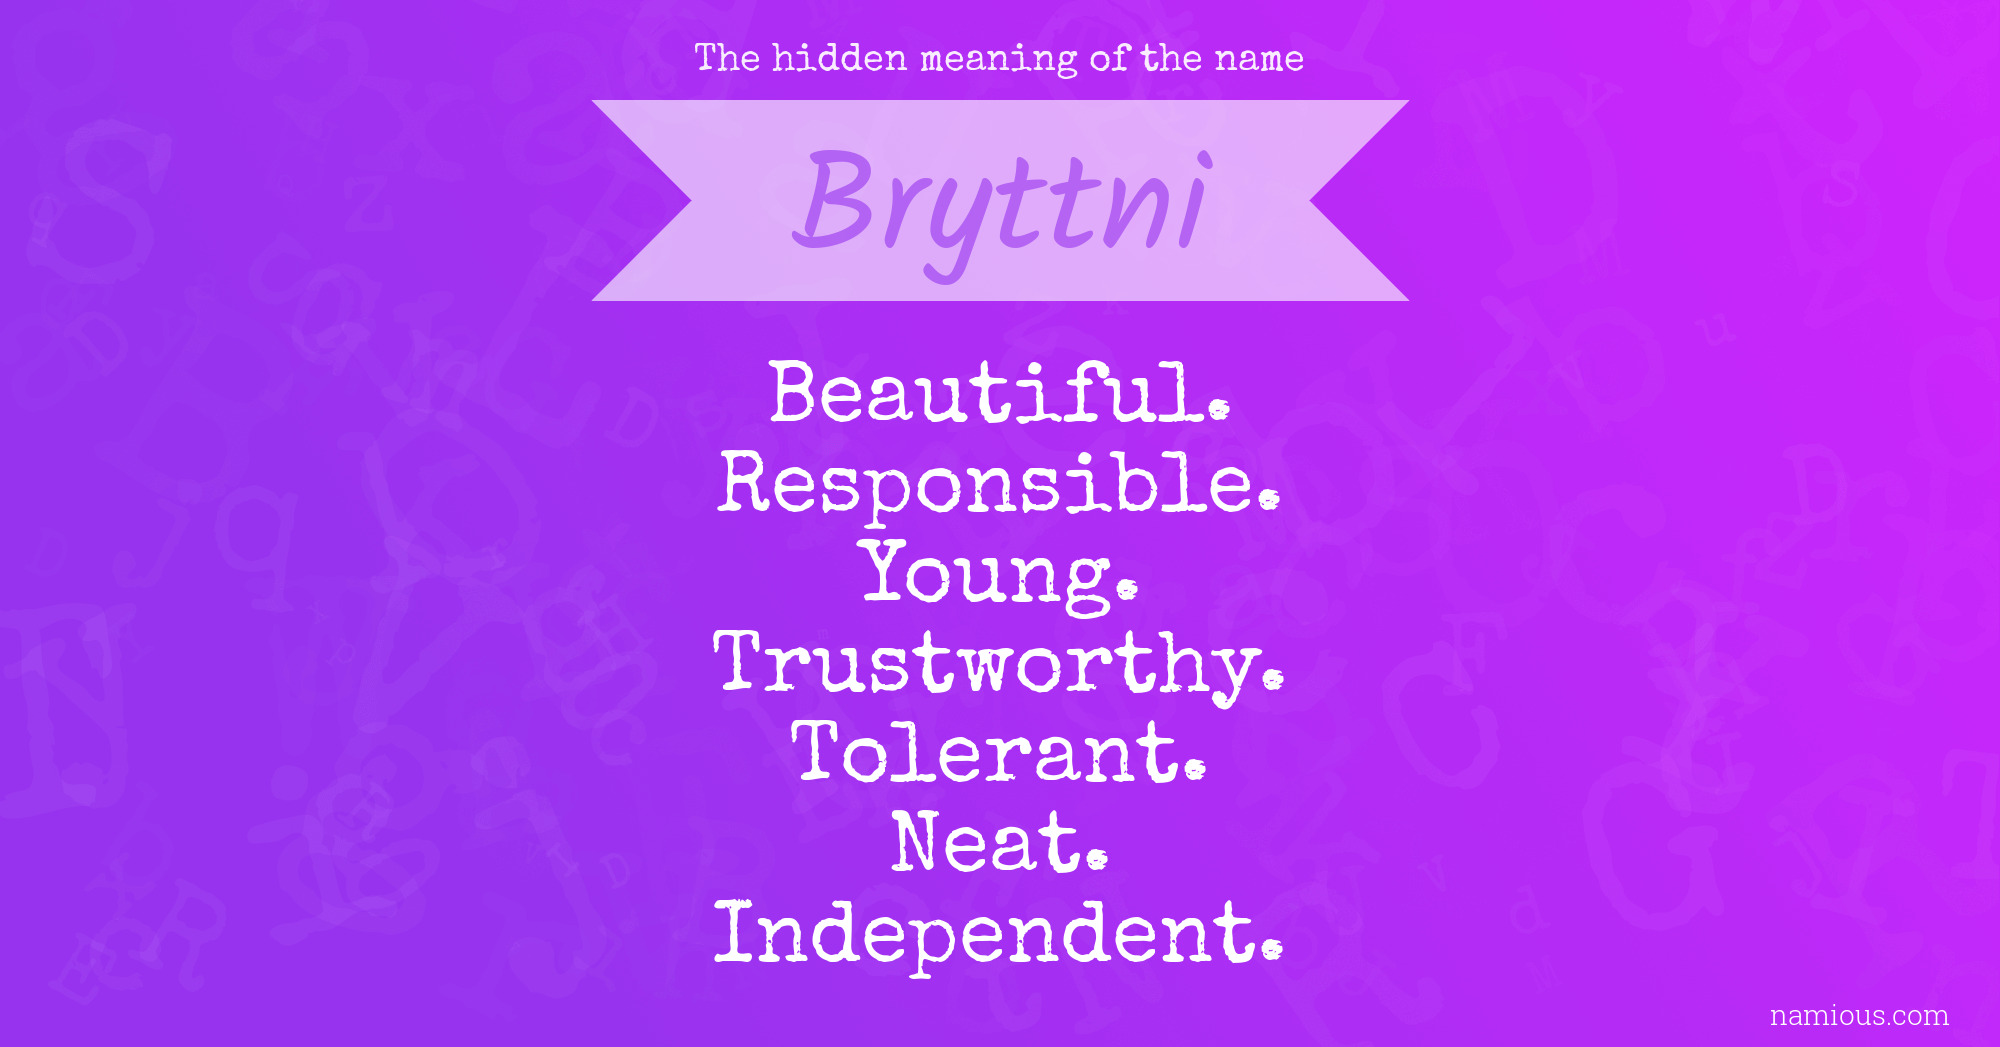 The hidden meaning of the name Bryttni